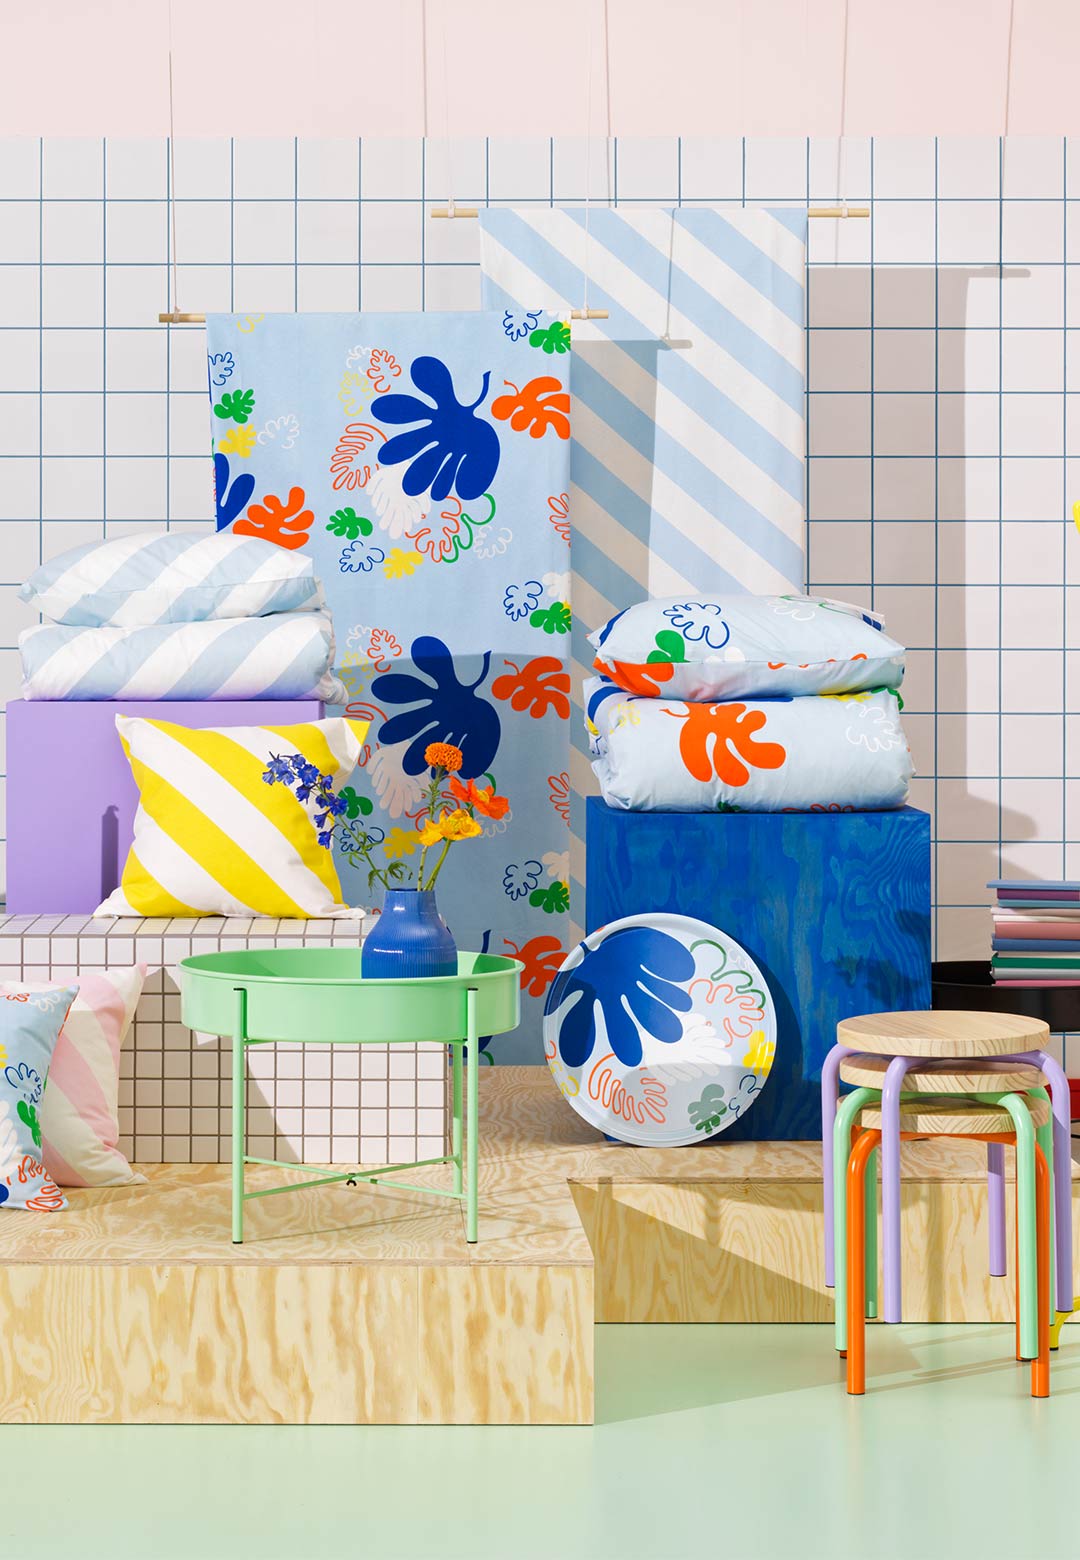 IKEA celebrates its 80th anniversary with its new 'Nytillverkad' collection